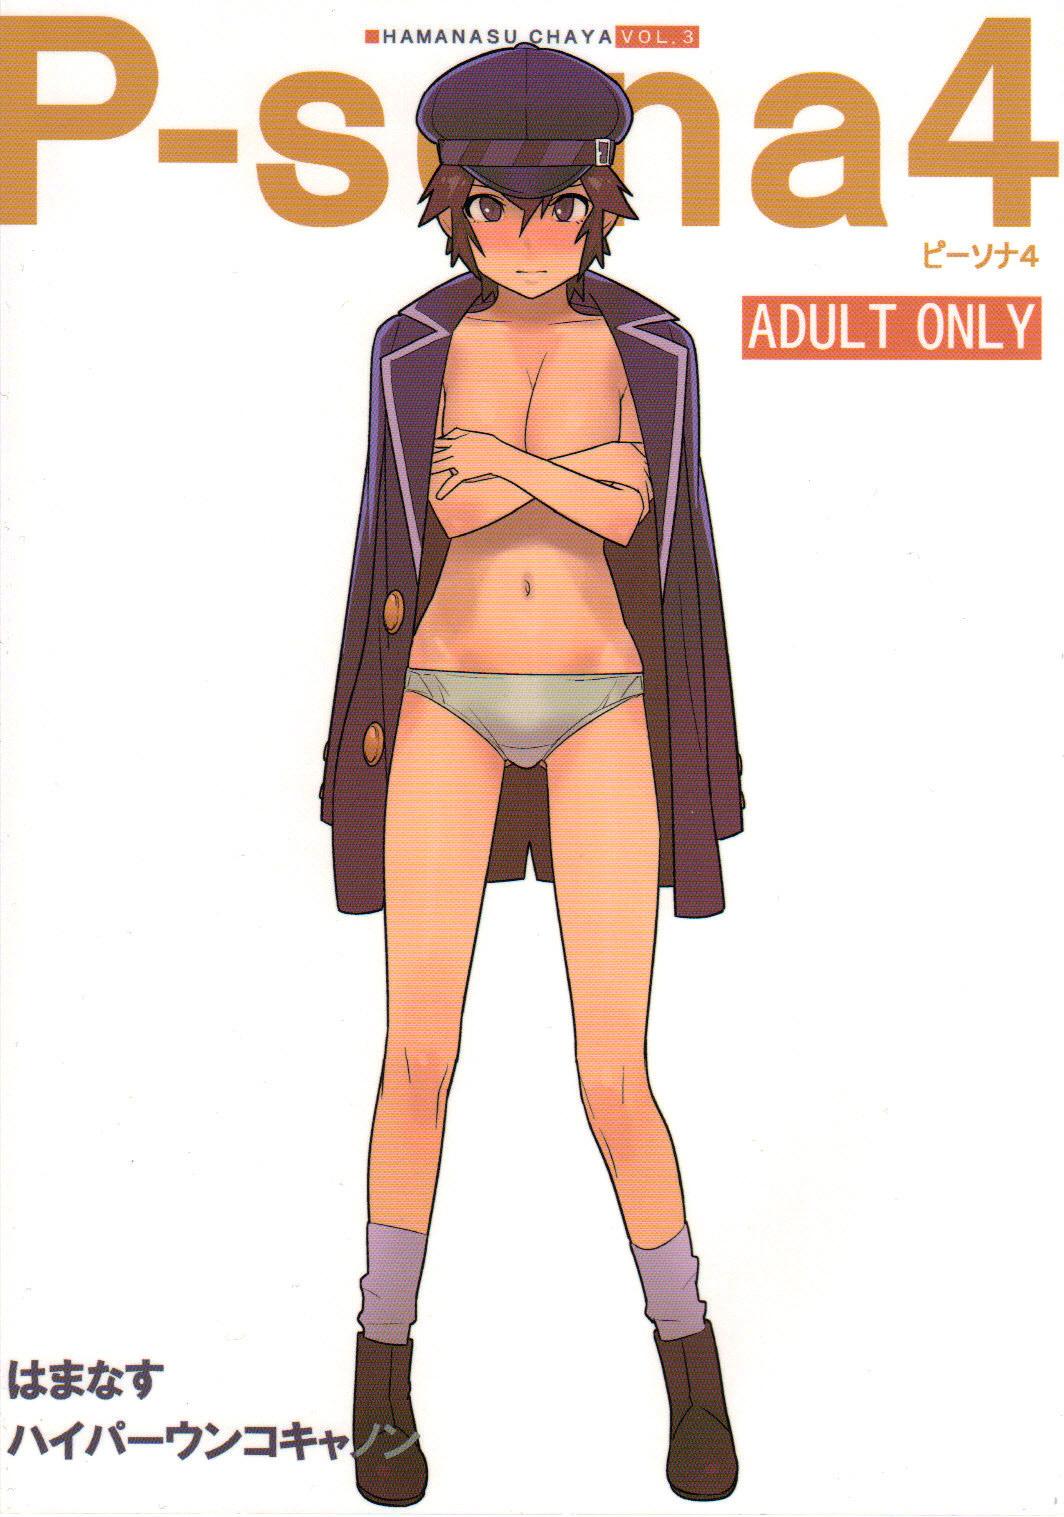 Room p-sona4 - Persona 4 Gaydudes - Picture 1